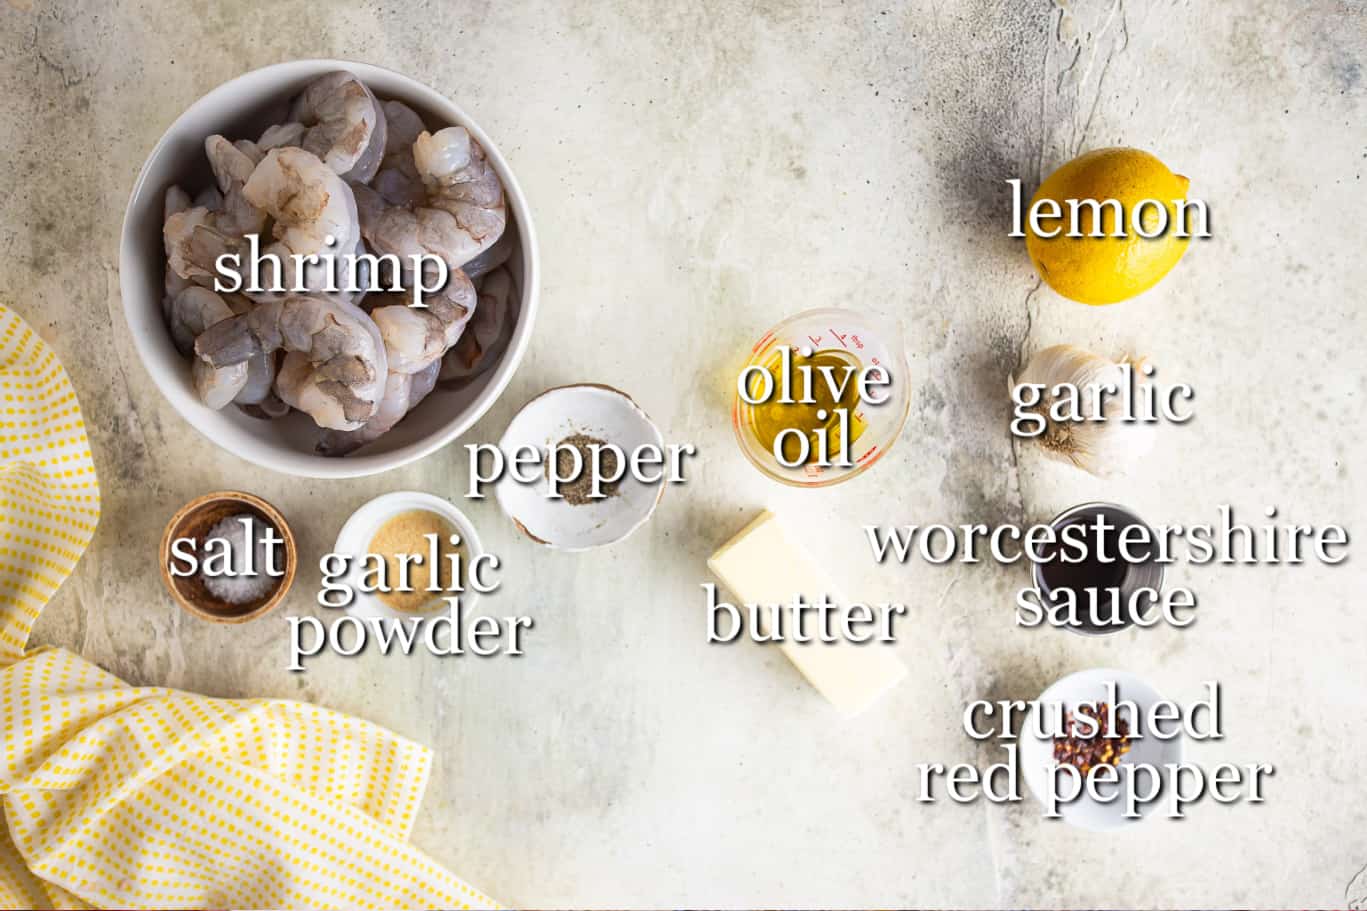 Ingredients for making shrimp scampi, with text labels.